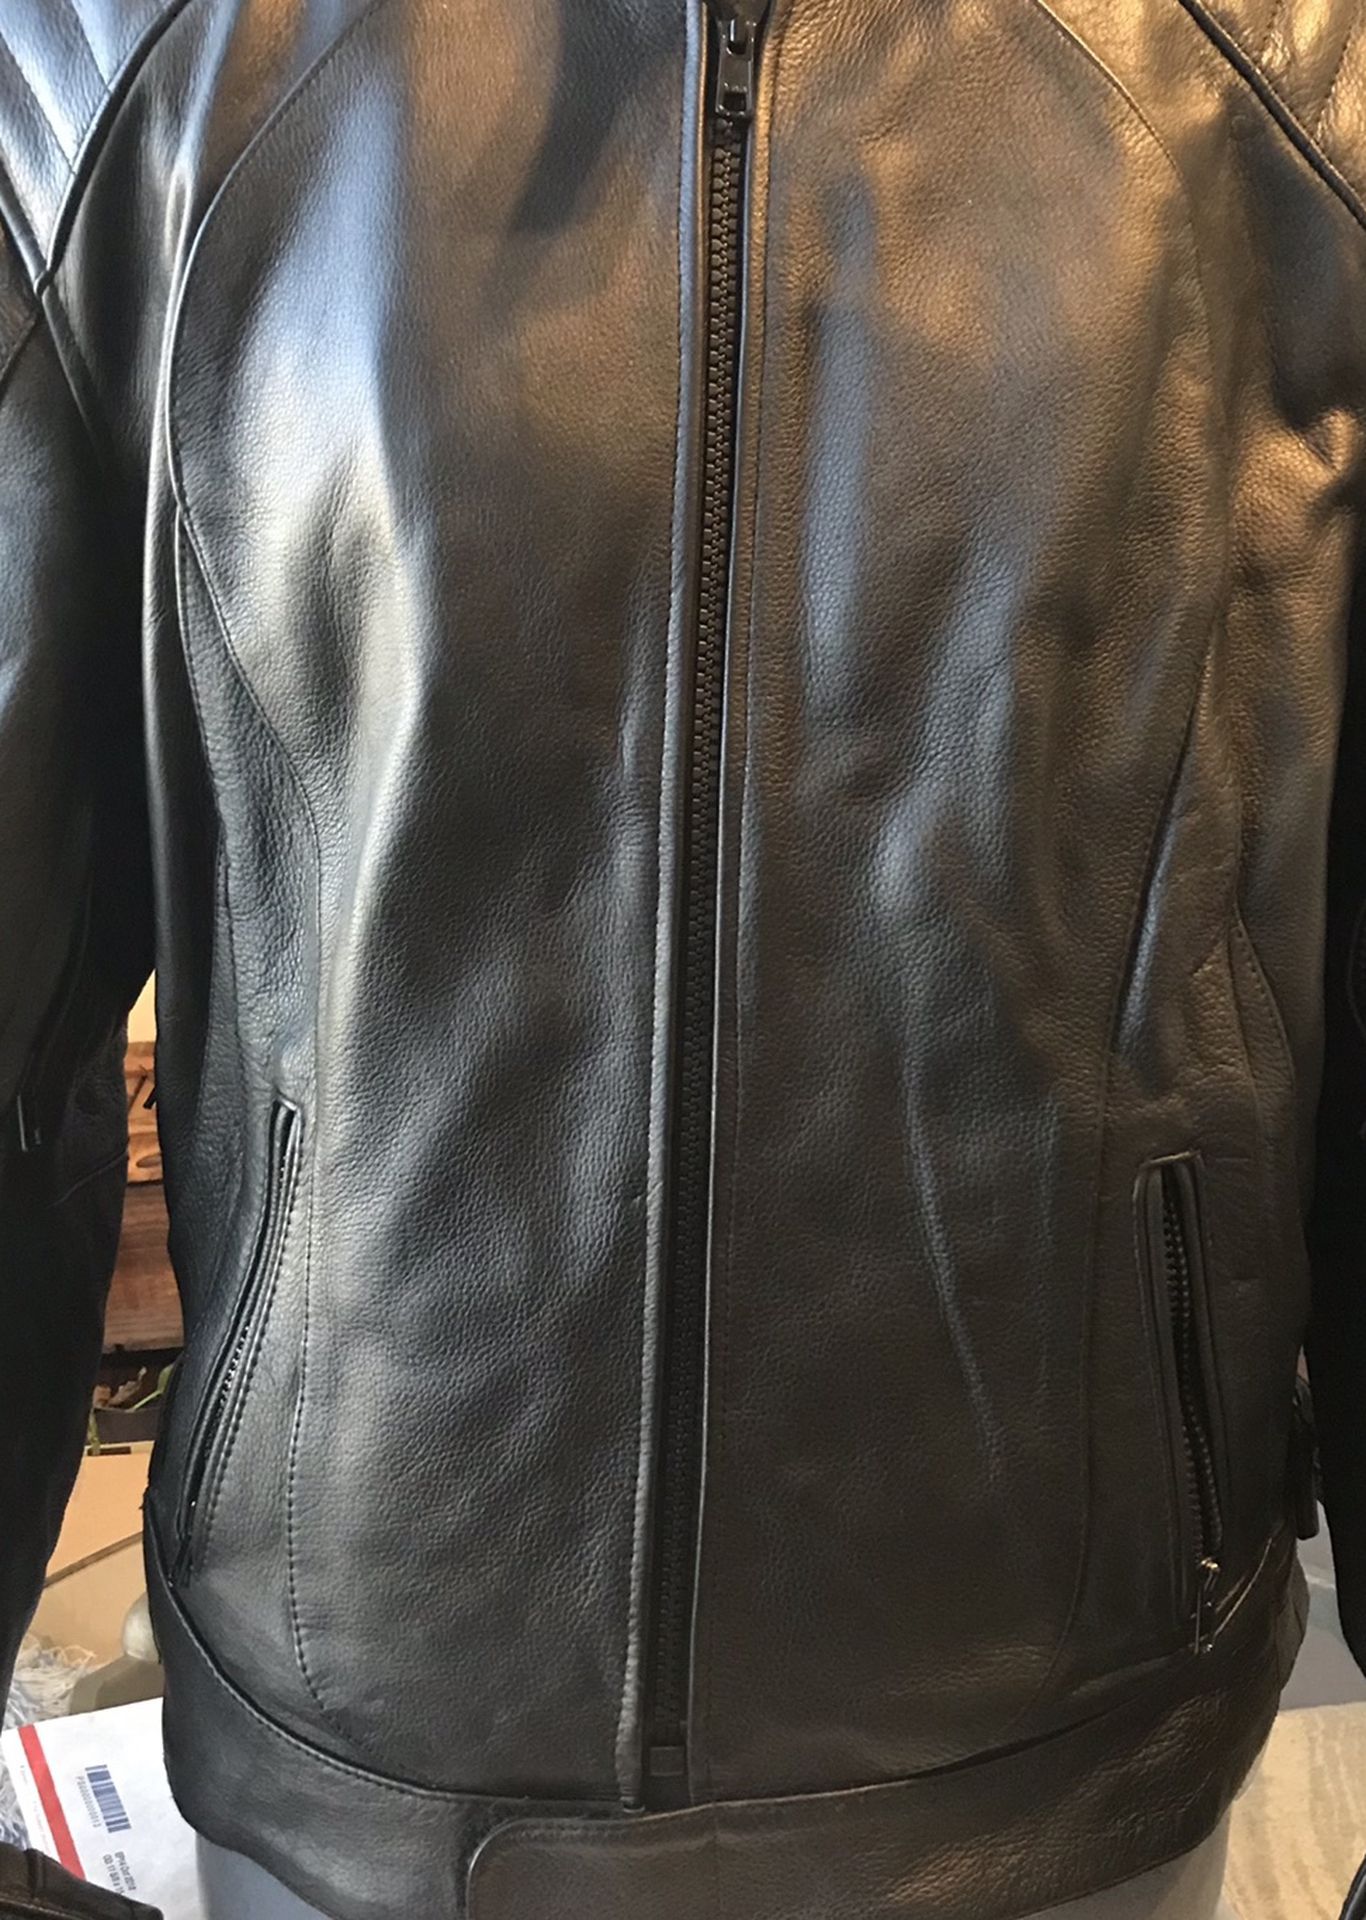 Women’s Leather Motorcycle Armor Jacket 2XL